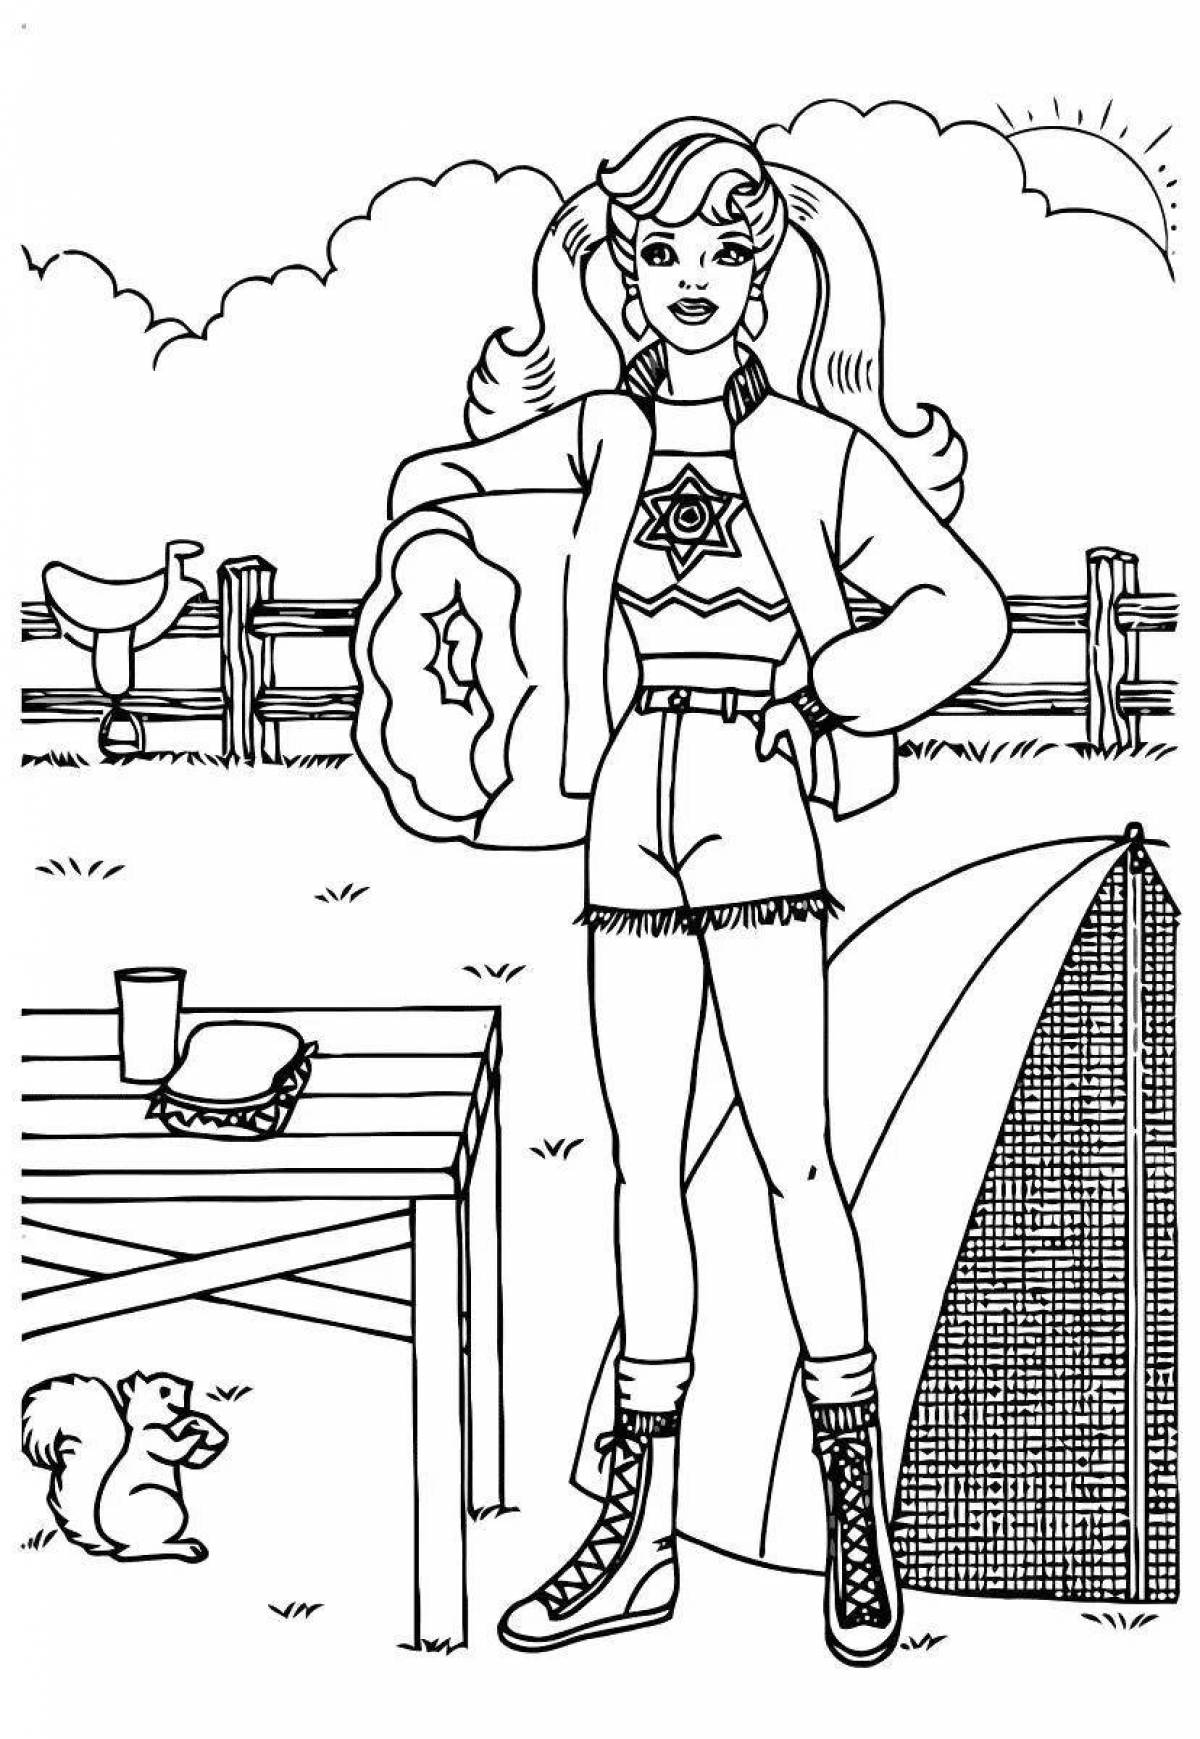 Great old barbie coloring book